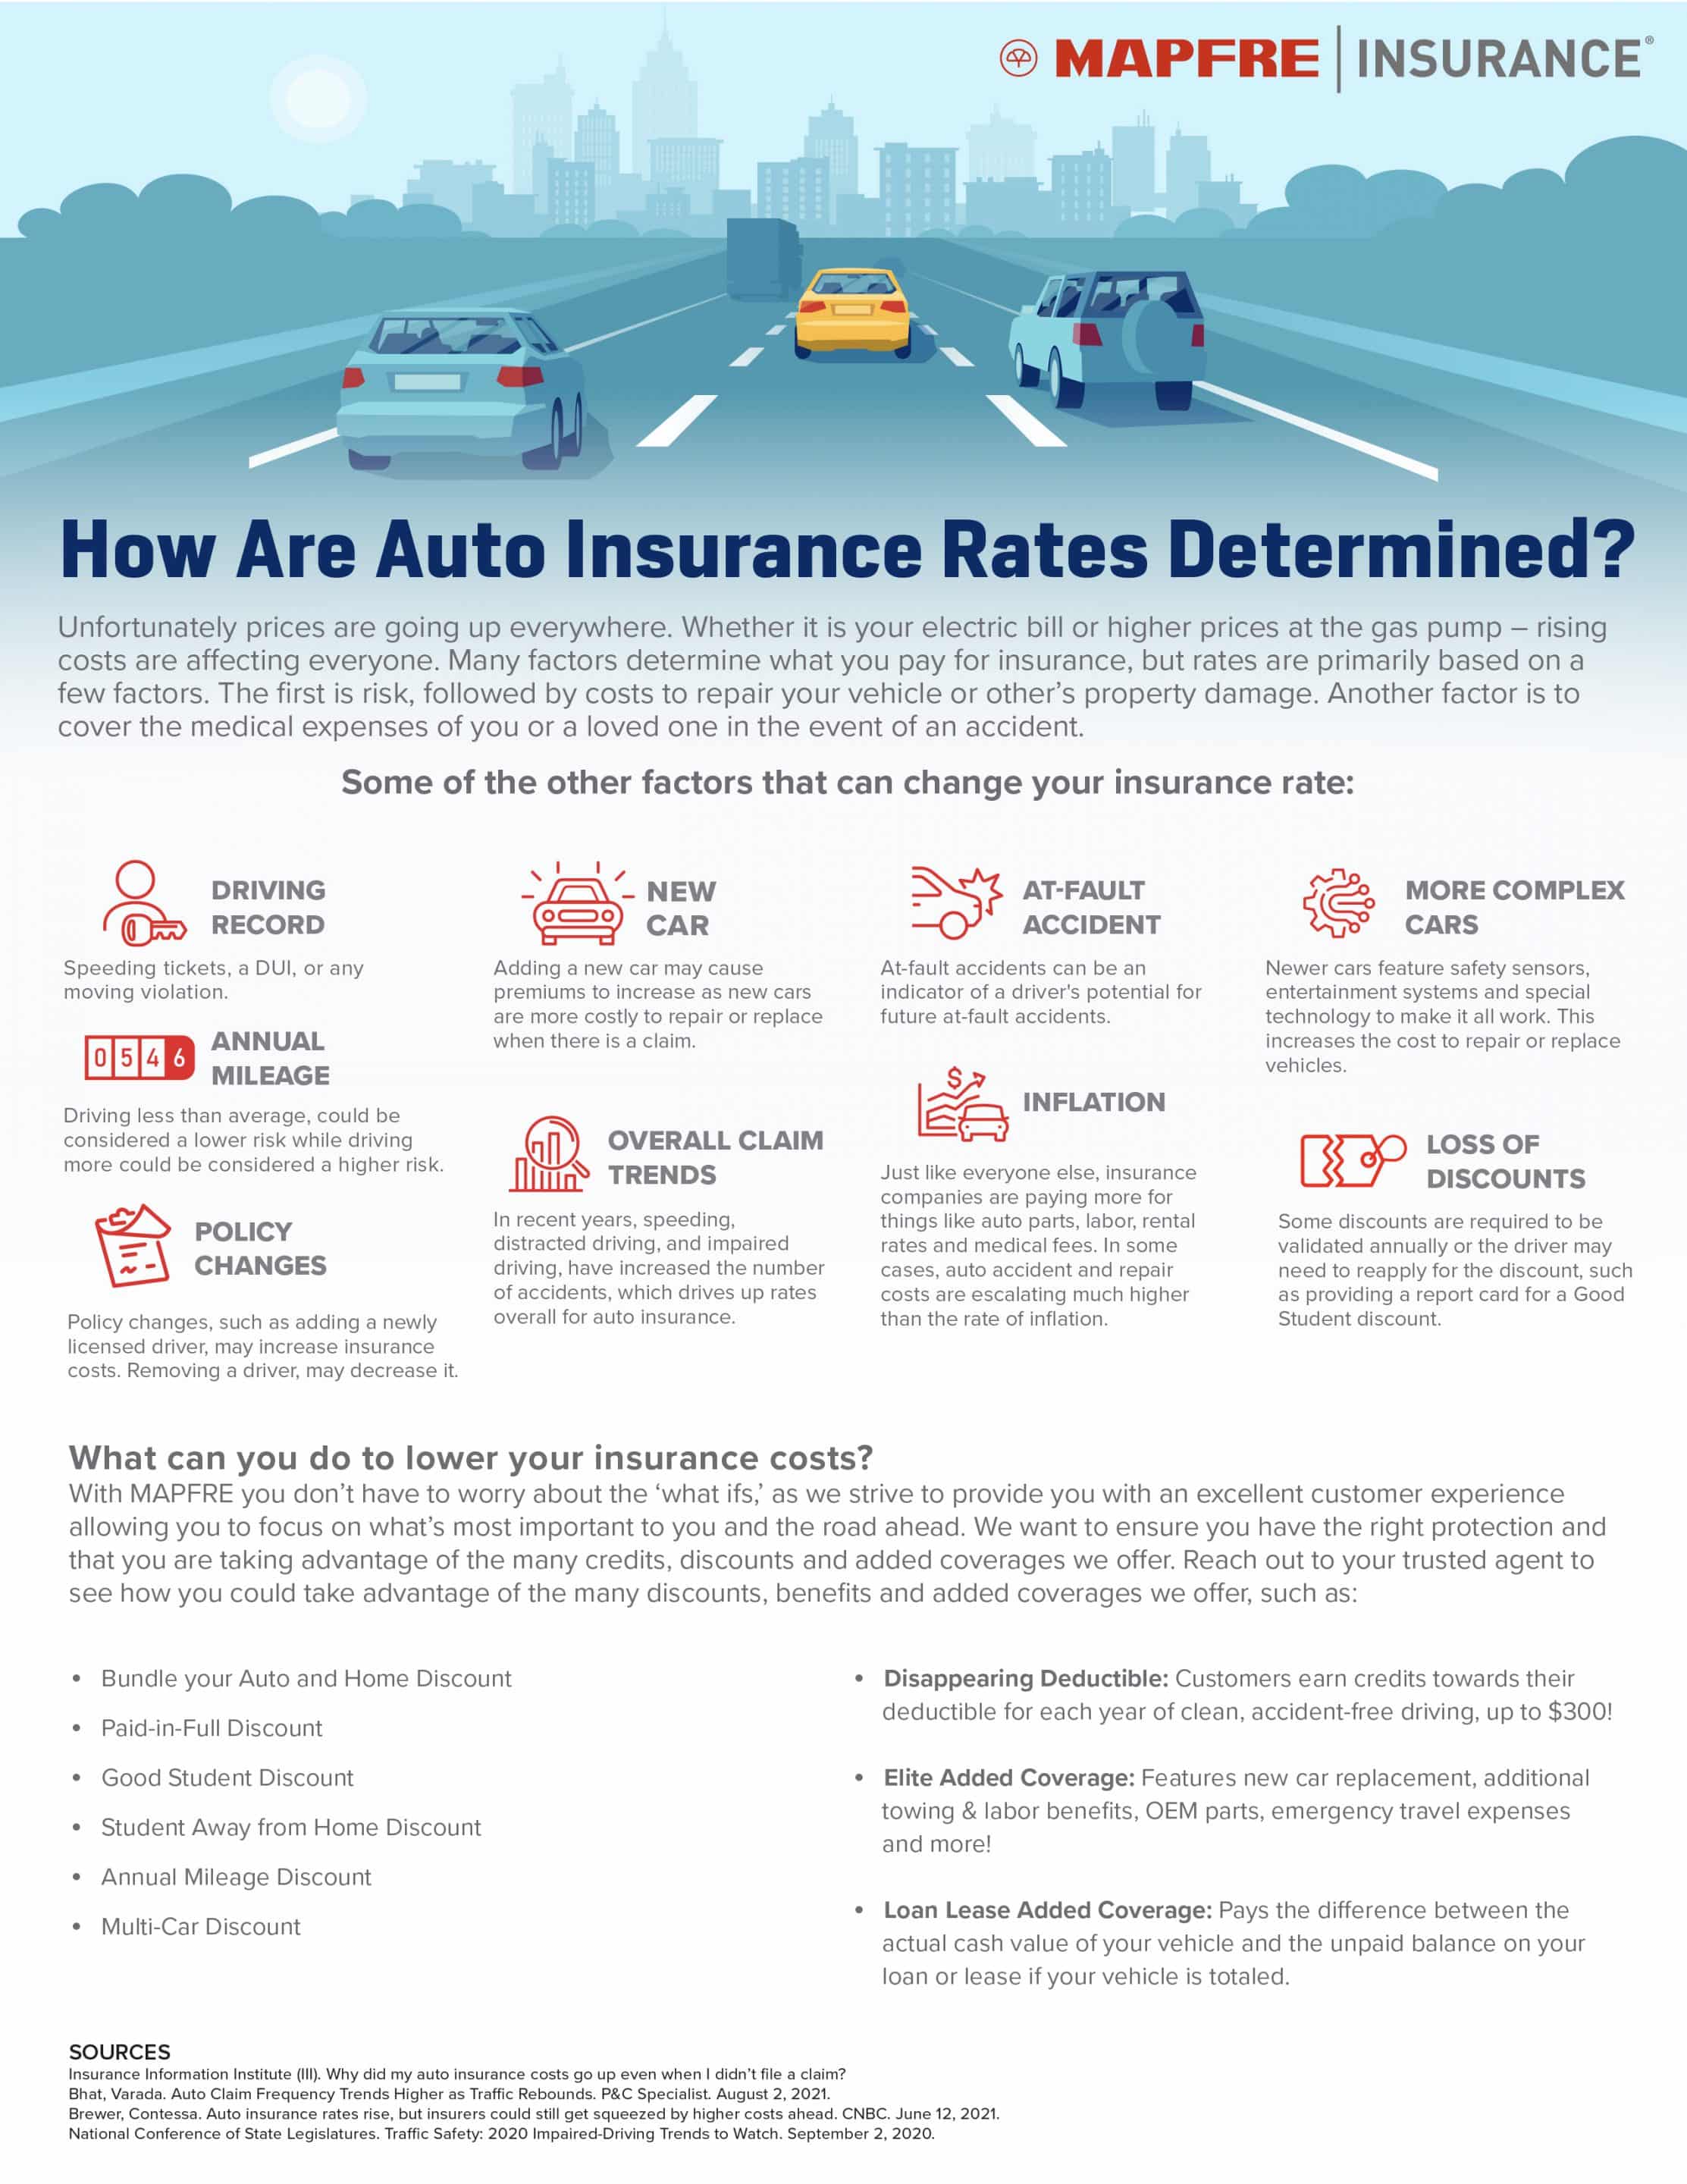 What Determines Auto Insurance Rates and How You Can Lower Them